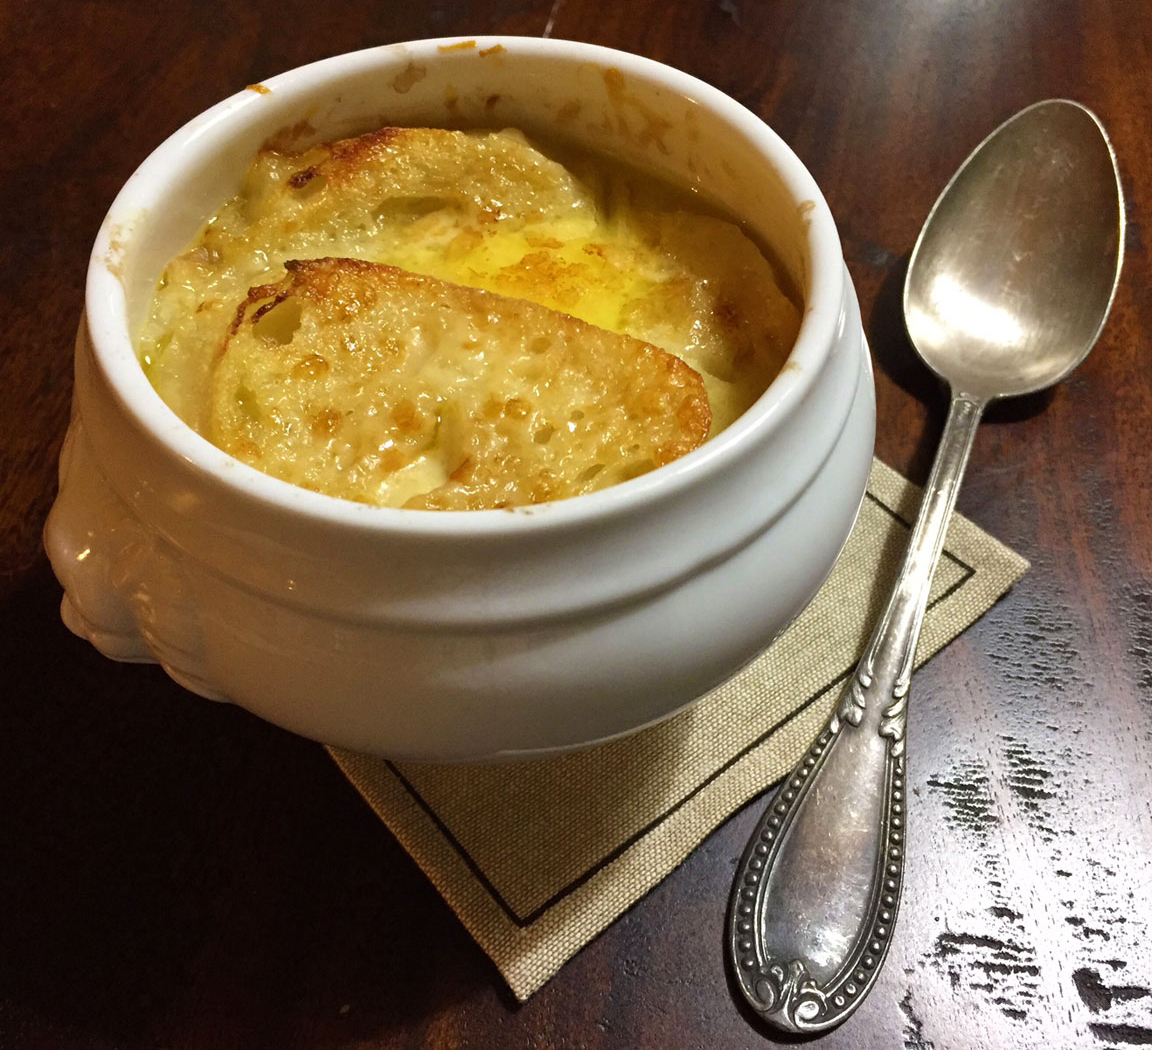 Onion soup: a staple of French cuisine